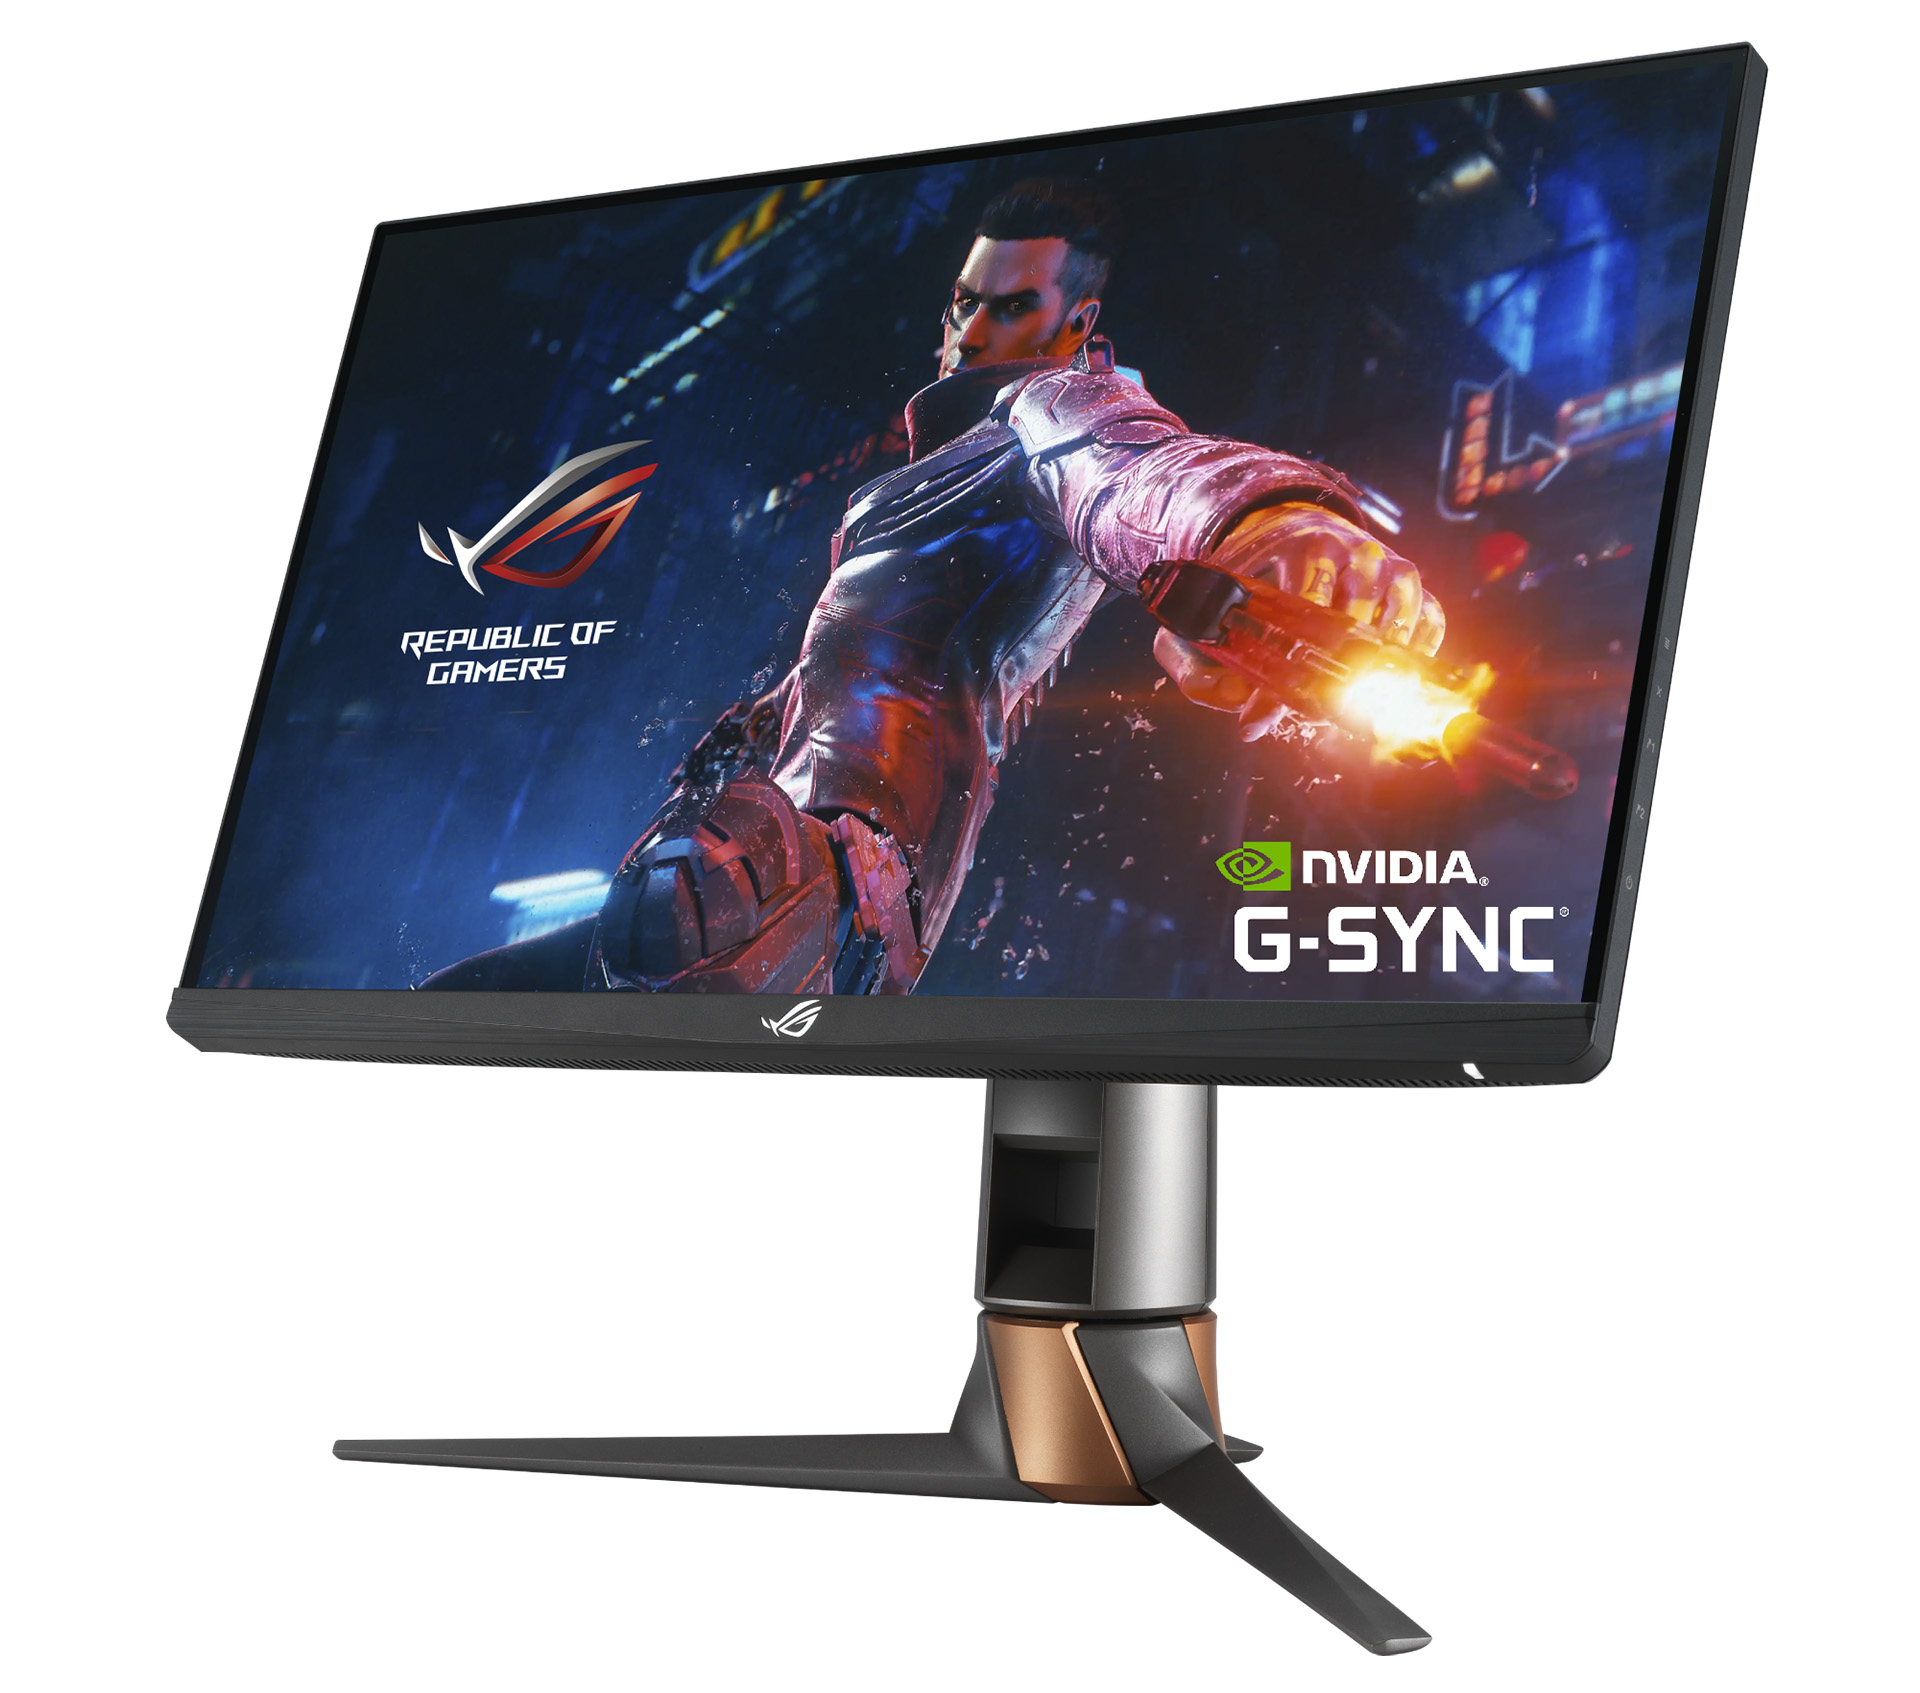 Nvidia and Asus' 360 Hz gaming monitor is really for esports pros